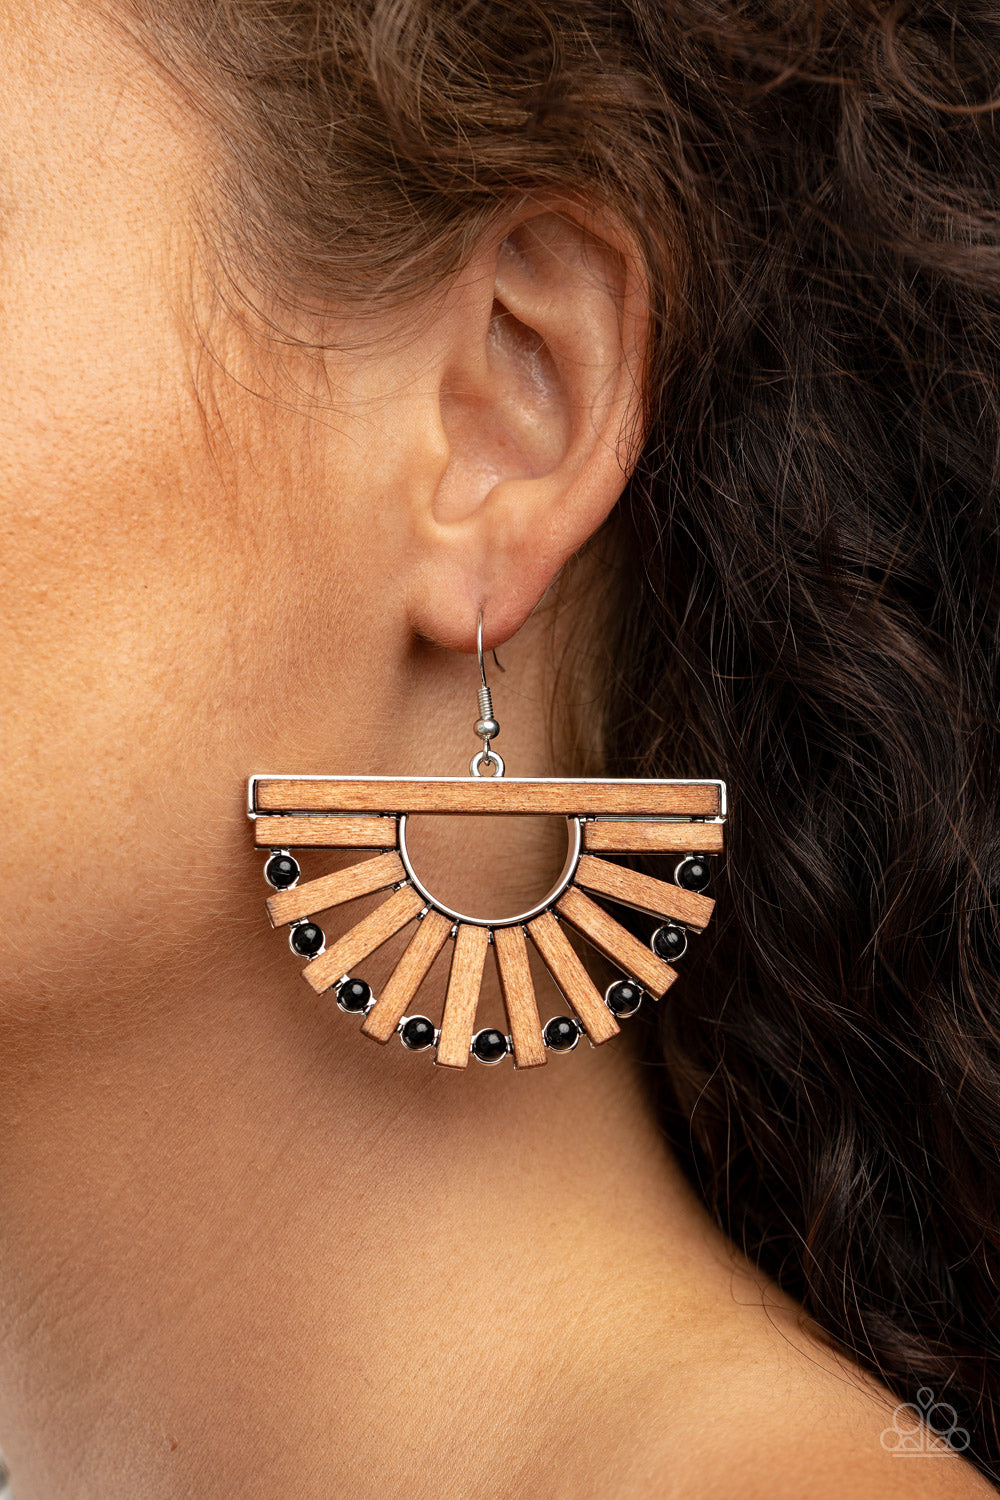 New Paparazzi Wooden Earrings - rectangular frames and dainty black beads alternate along an airy silver frame, coalescing into a radiant crescent for an earthy flair. Earring attaches to a standard fishhook fitting.